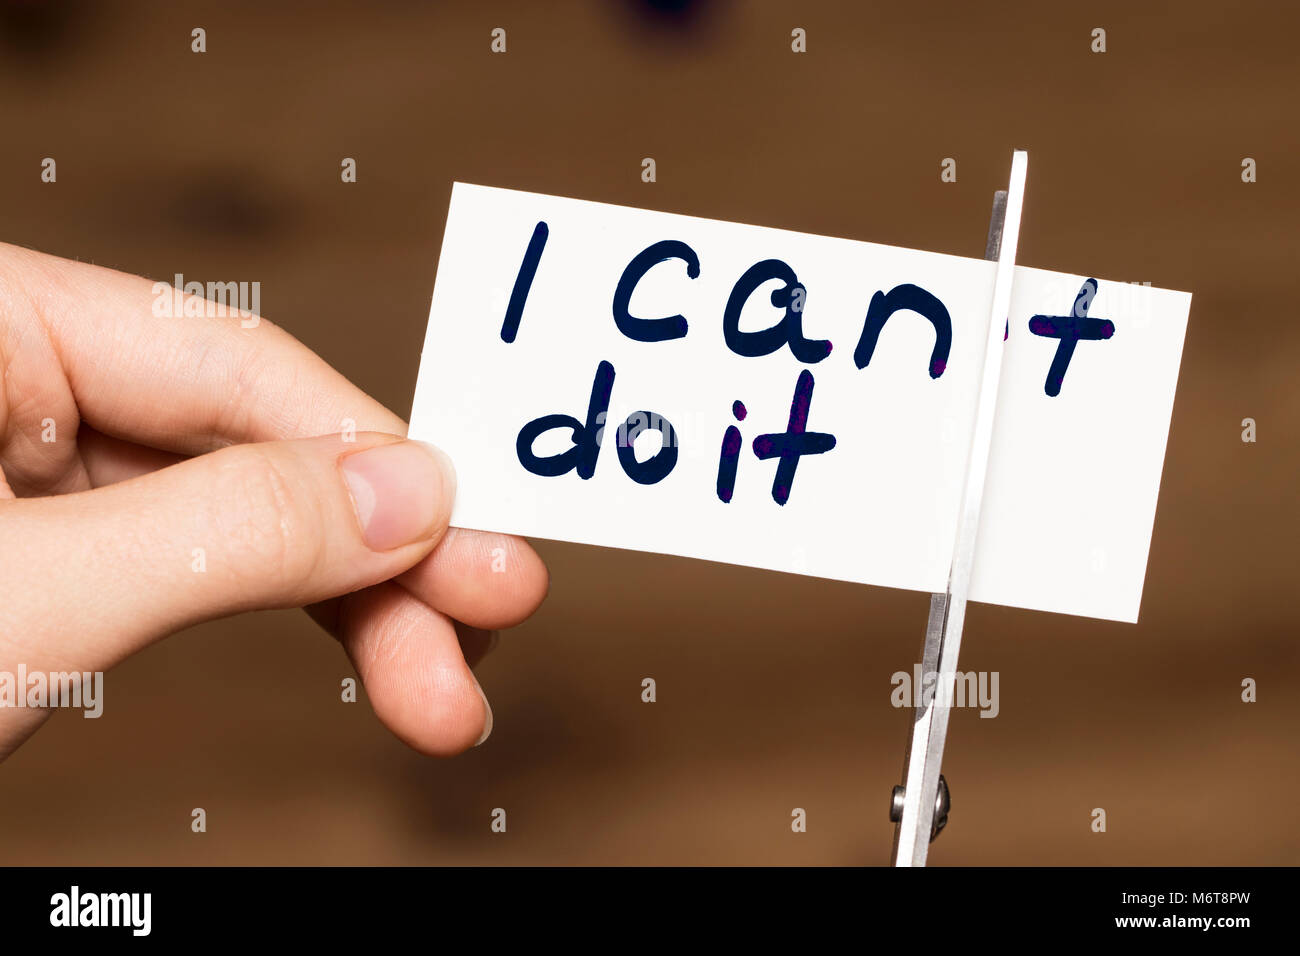 Man Using Scissors To Remove The Word Can T To Read I Can Do It Stock Photo Alamy